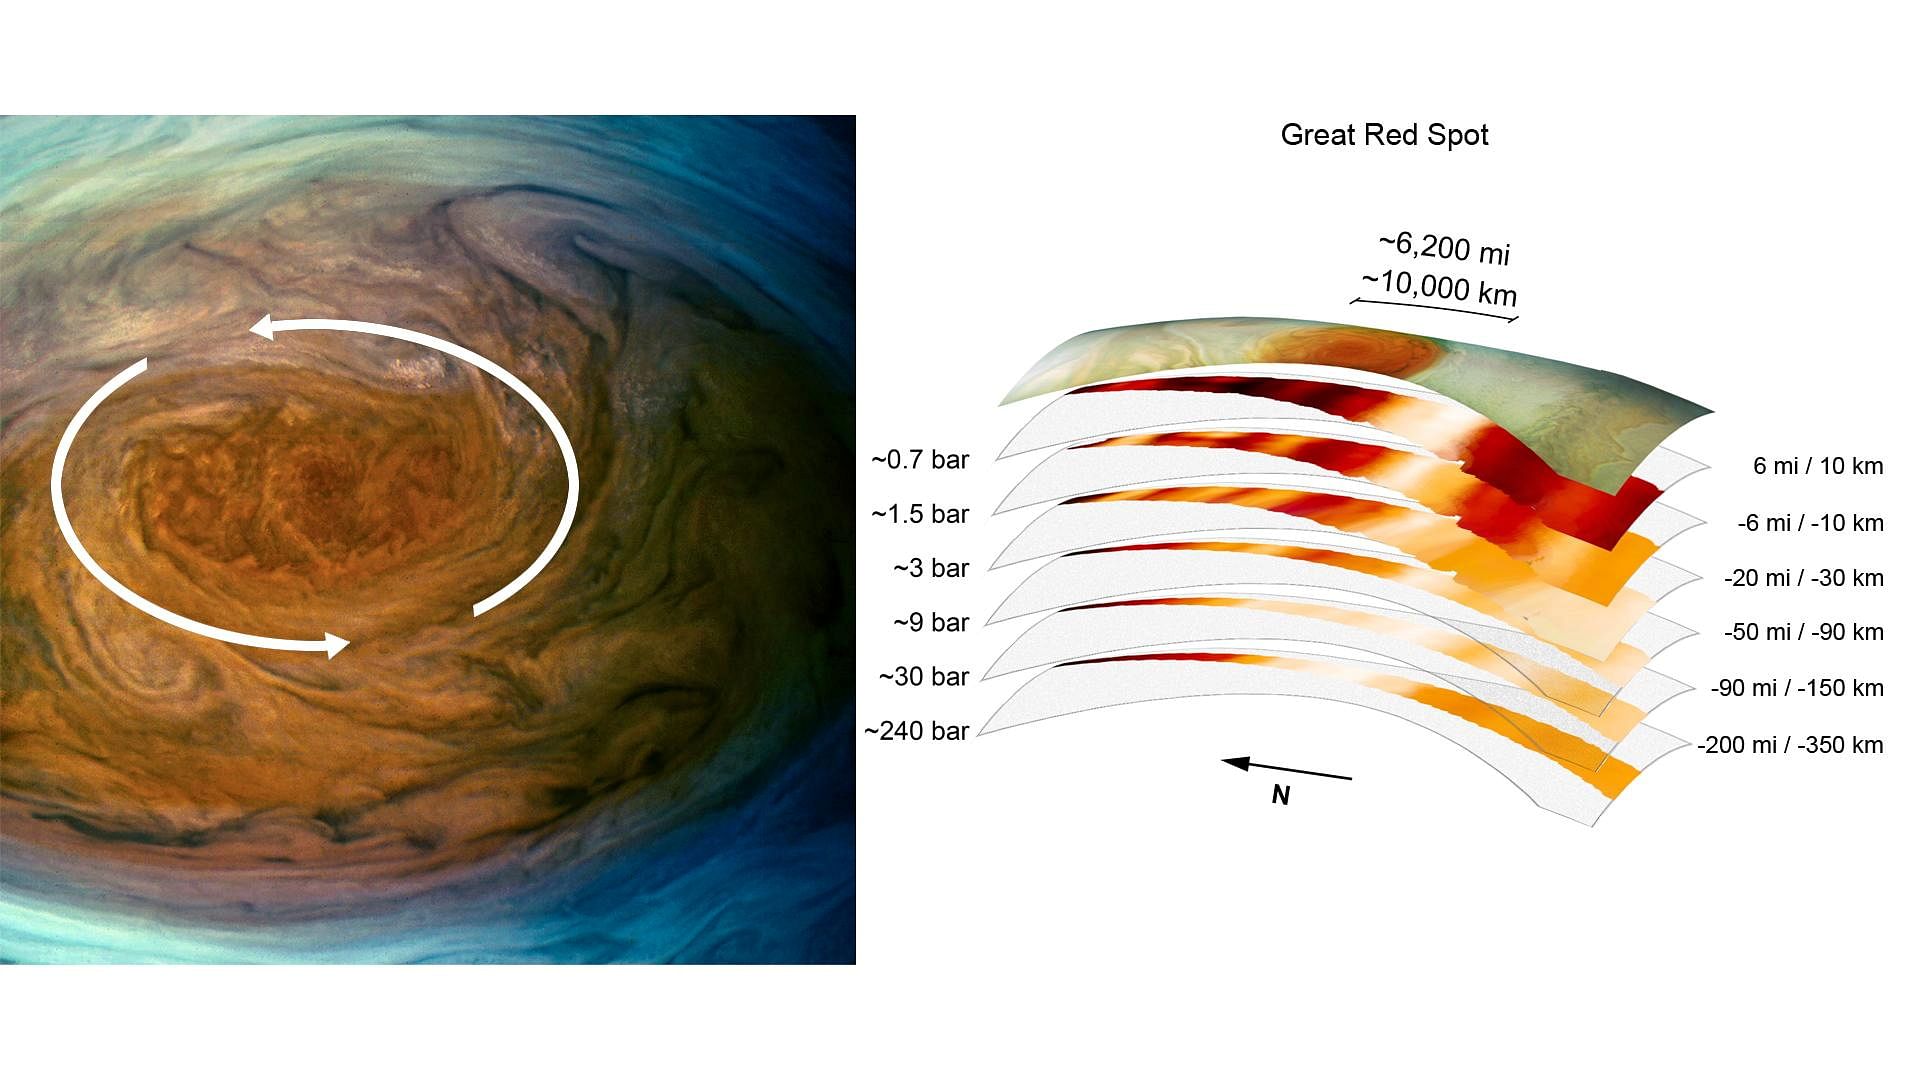 Jupiters Huge Great Red Spot Storm Is Much Deeper Than Expected The